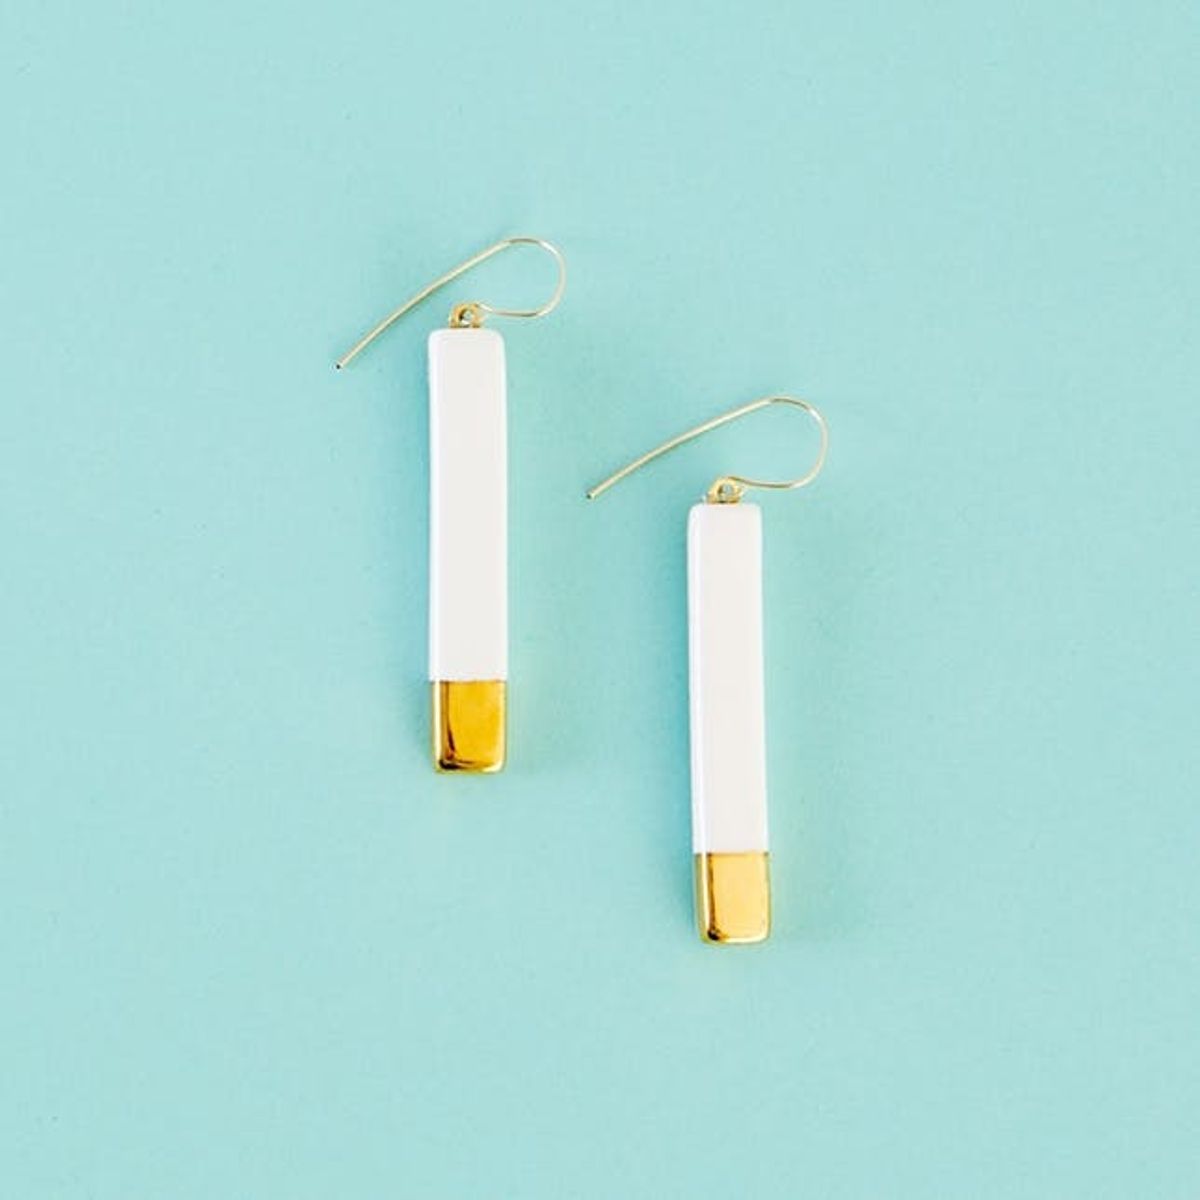 18 Pieces of Maker-Made Jewelry You Need in Your Life